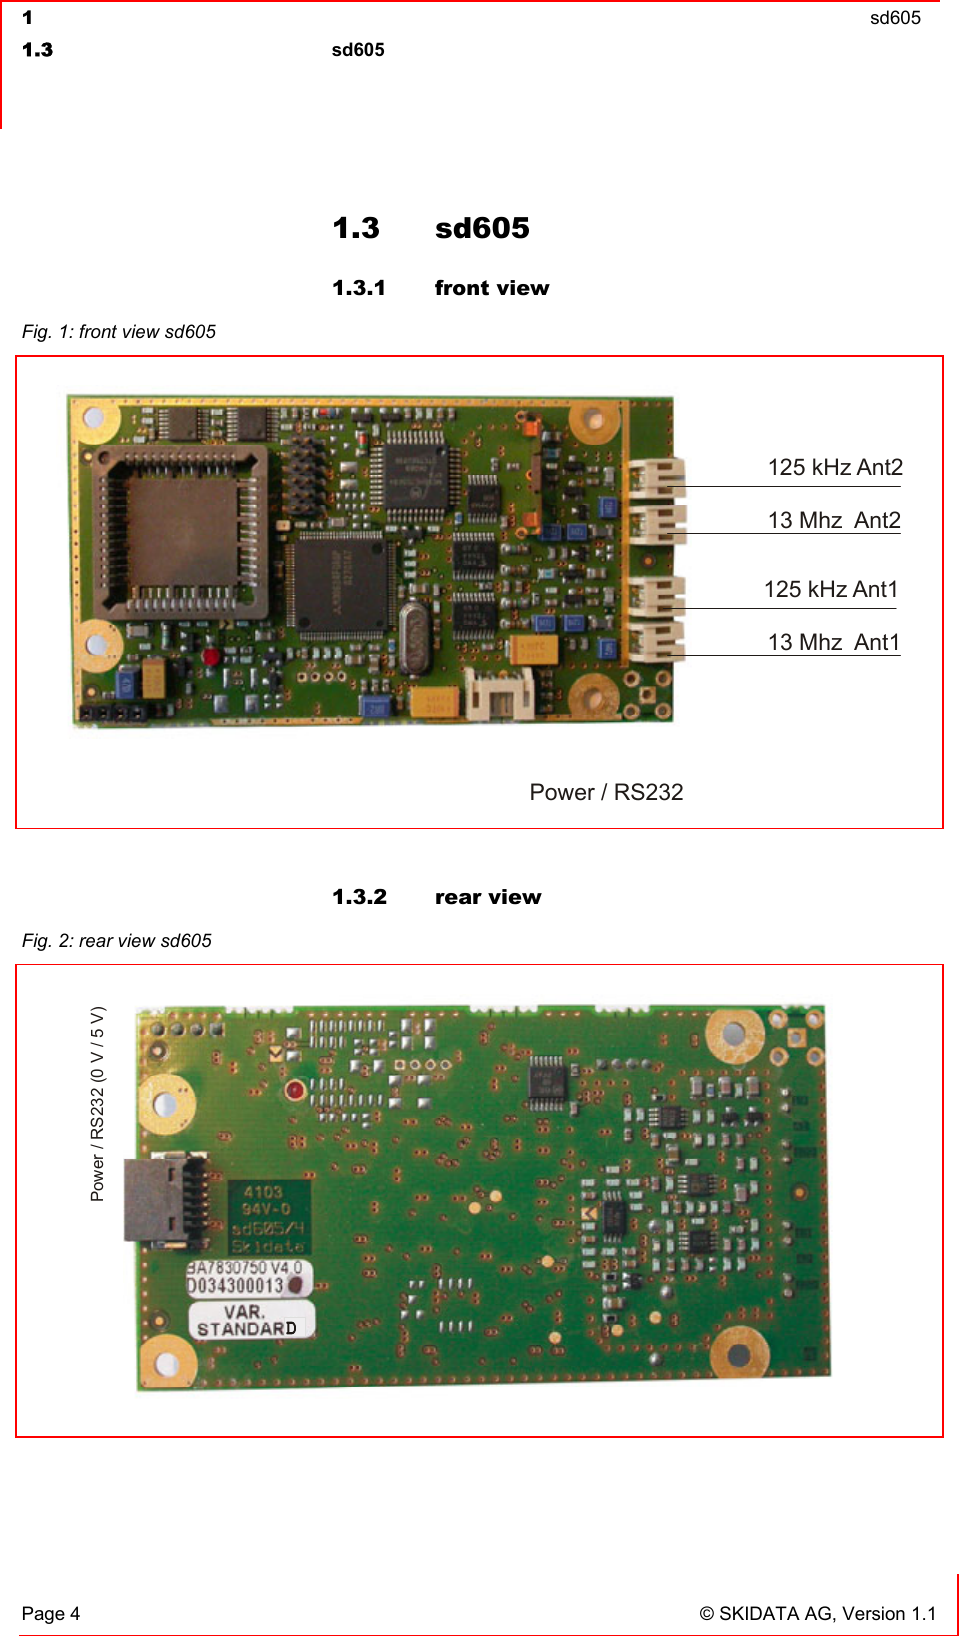  1  sd605  1.3 sd605   Page 4  © SKIDATA AG, Version 1.1 1.3 sd605 1.3.1 front view  1.3.2 rear view  Fig. 1: front view sd605  13 Mhz  Ant213 Mhz  Ant1125 kHz Ant1Power / RS232125 kHz Ant2 Fig. 2: rear view sd605  Power / RS232 (0 V / 5 V) 